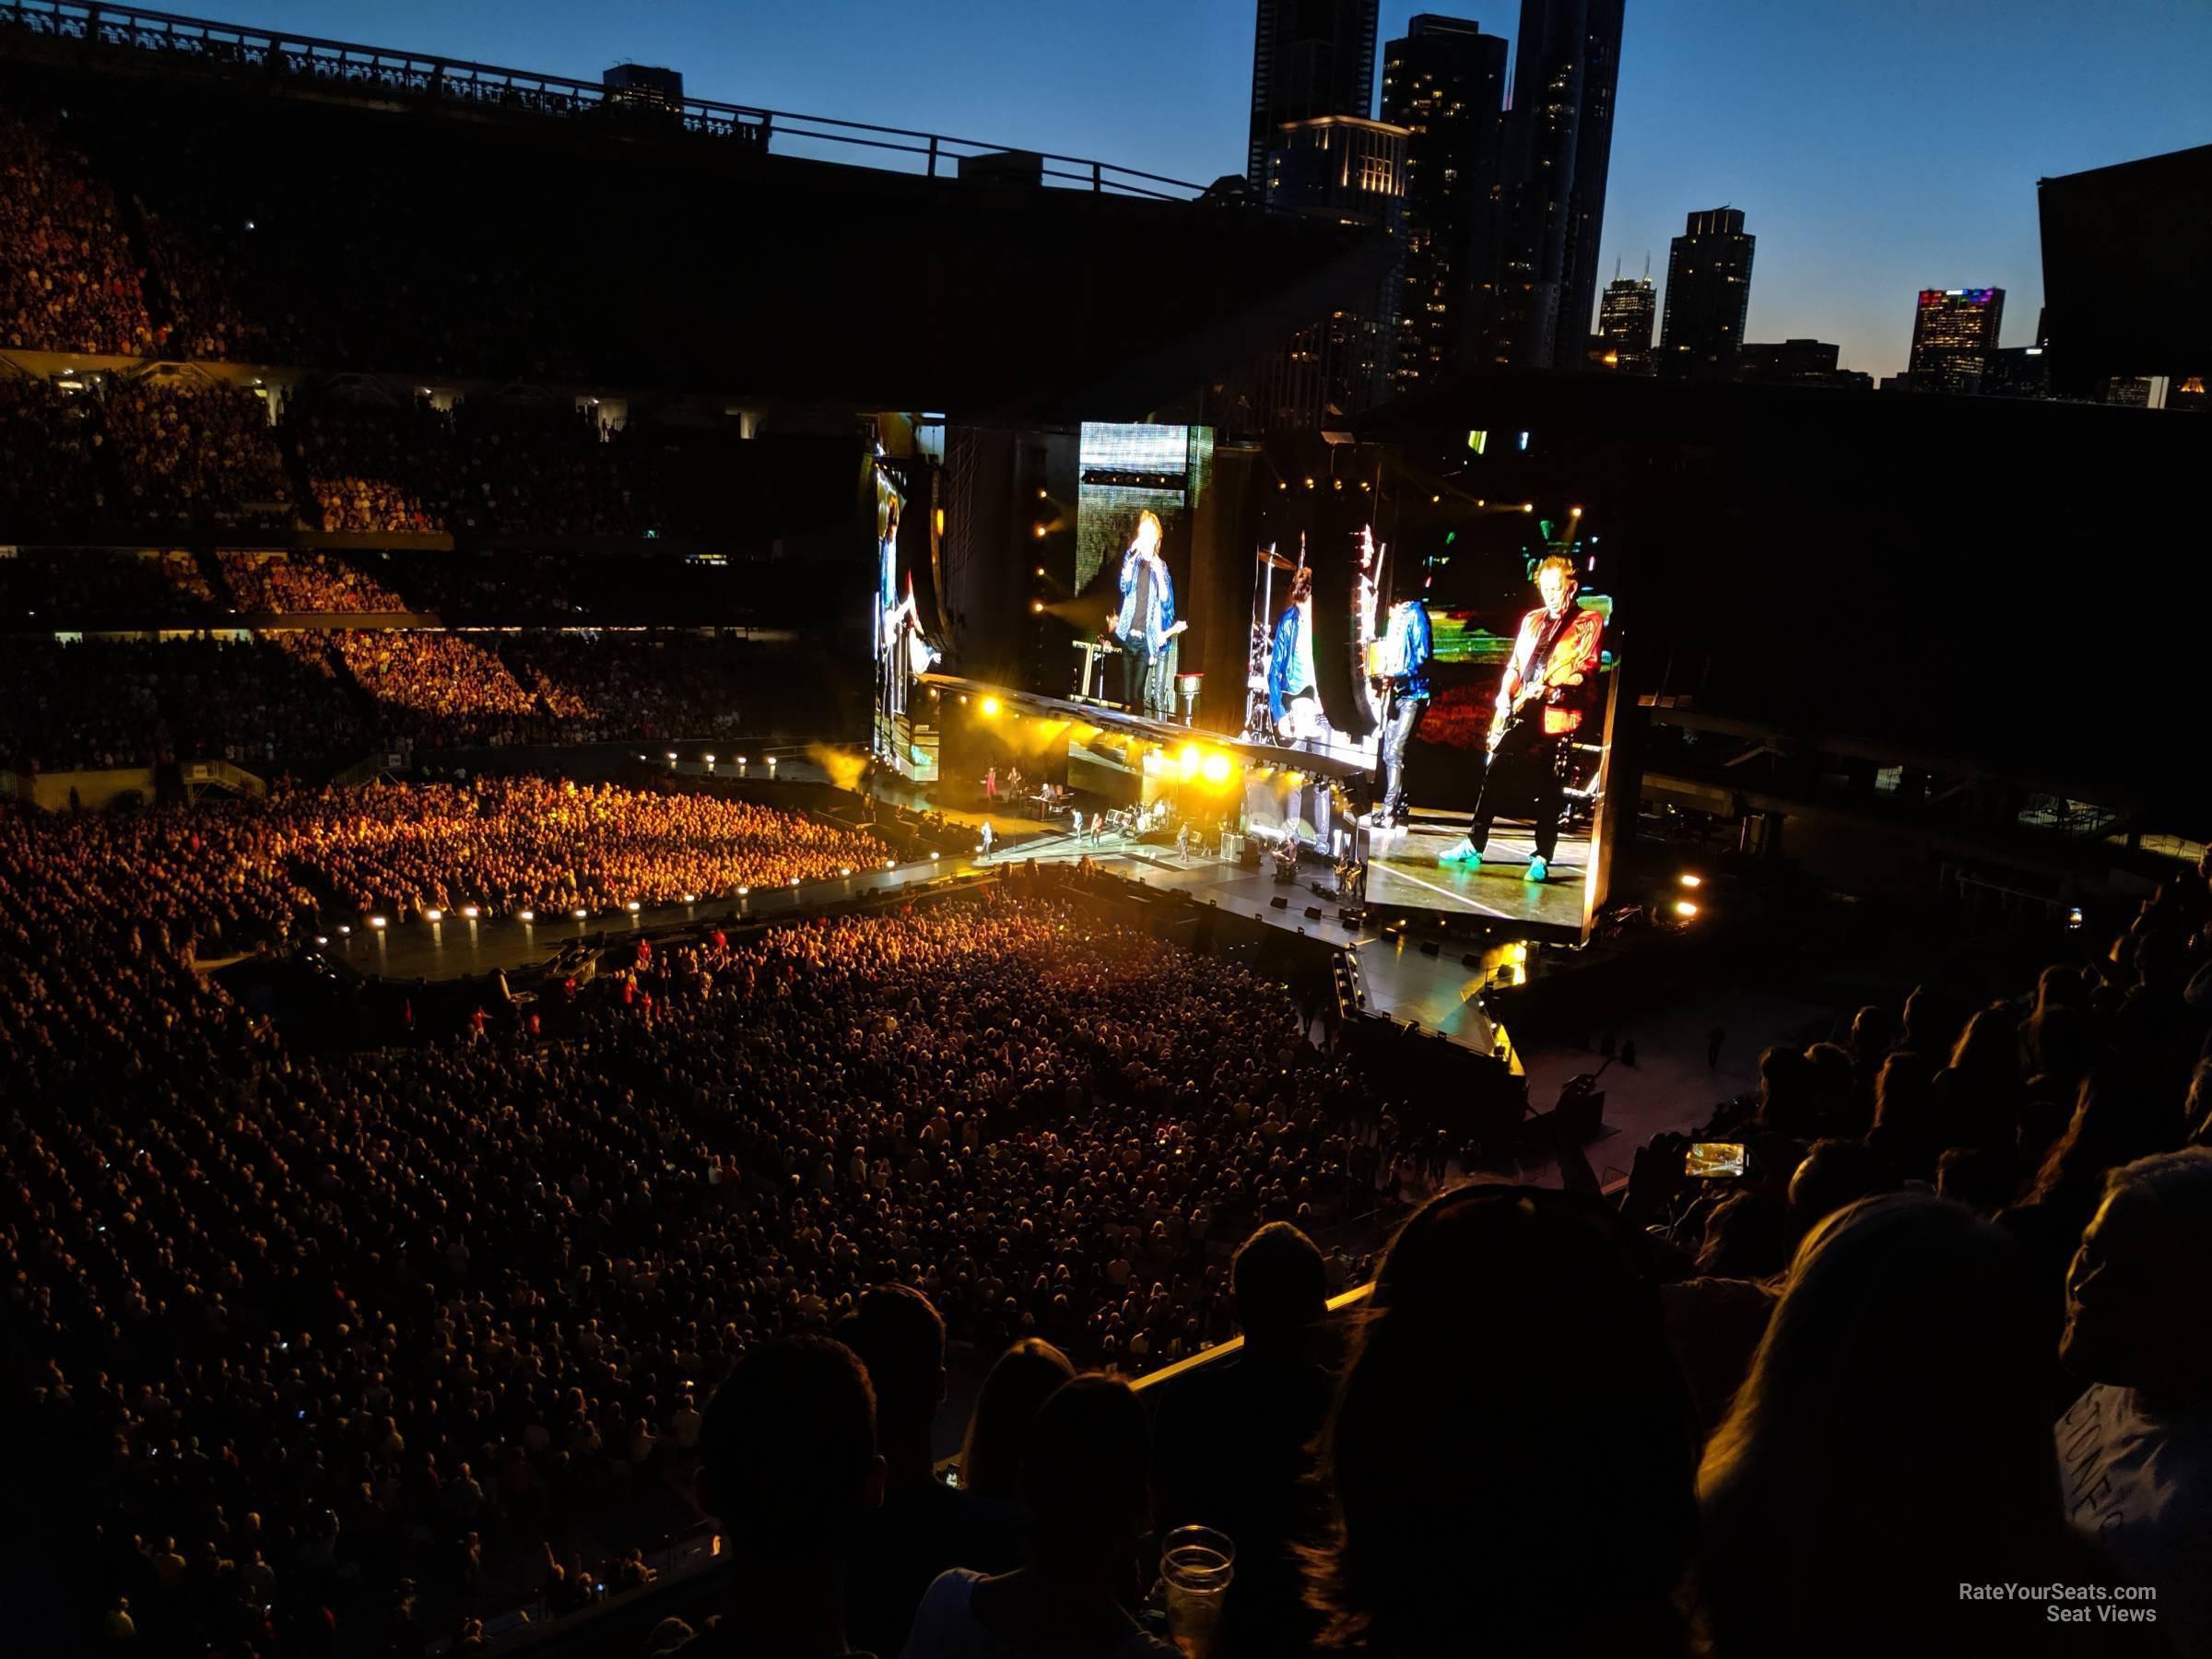 section 309, row 12 seat view  for concert - soldier field